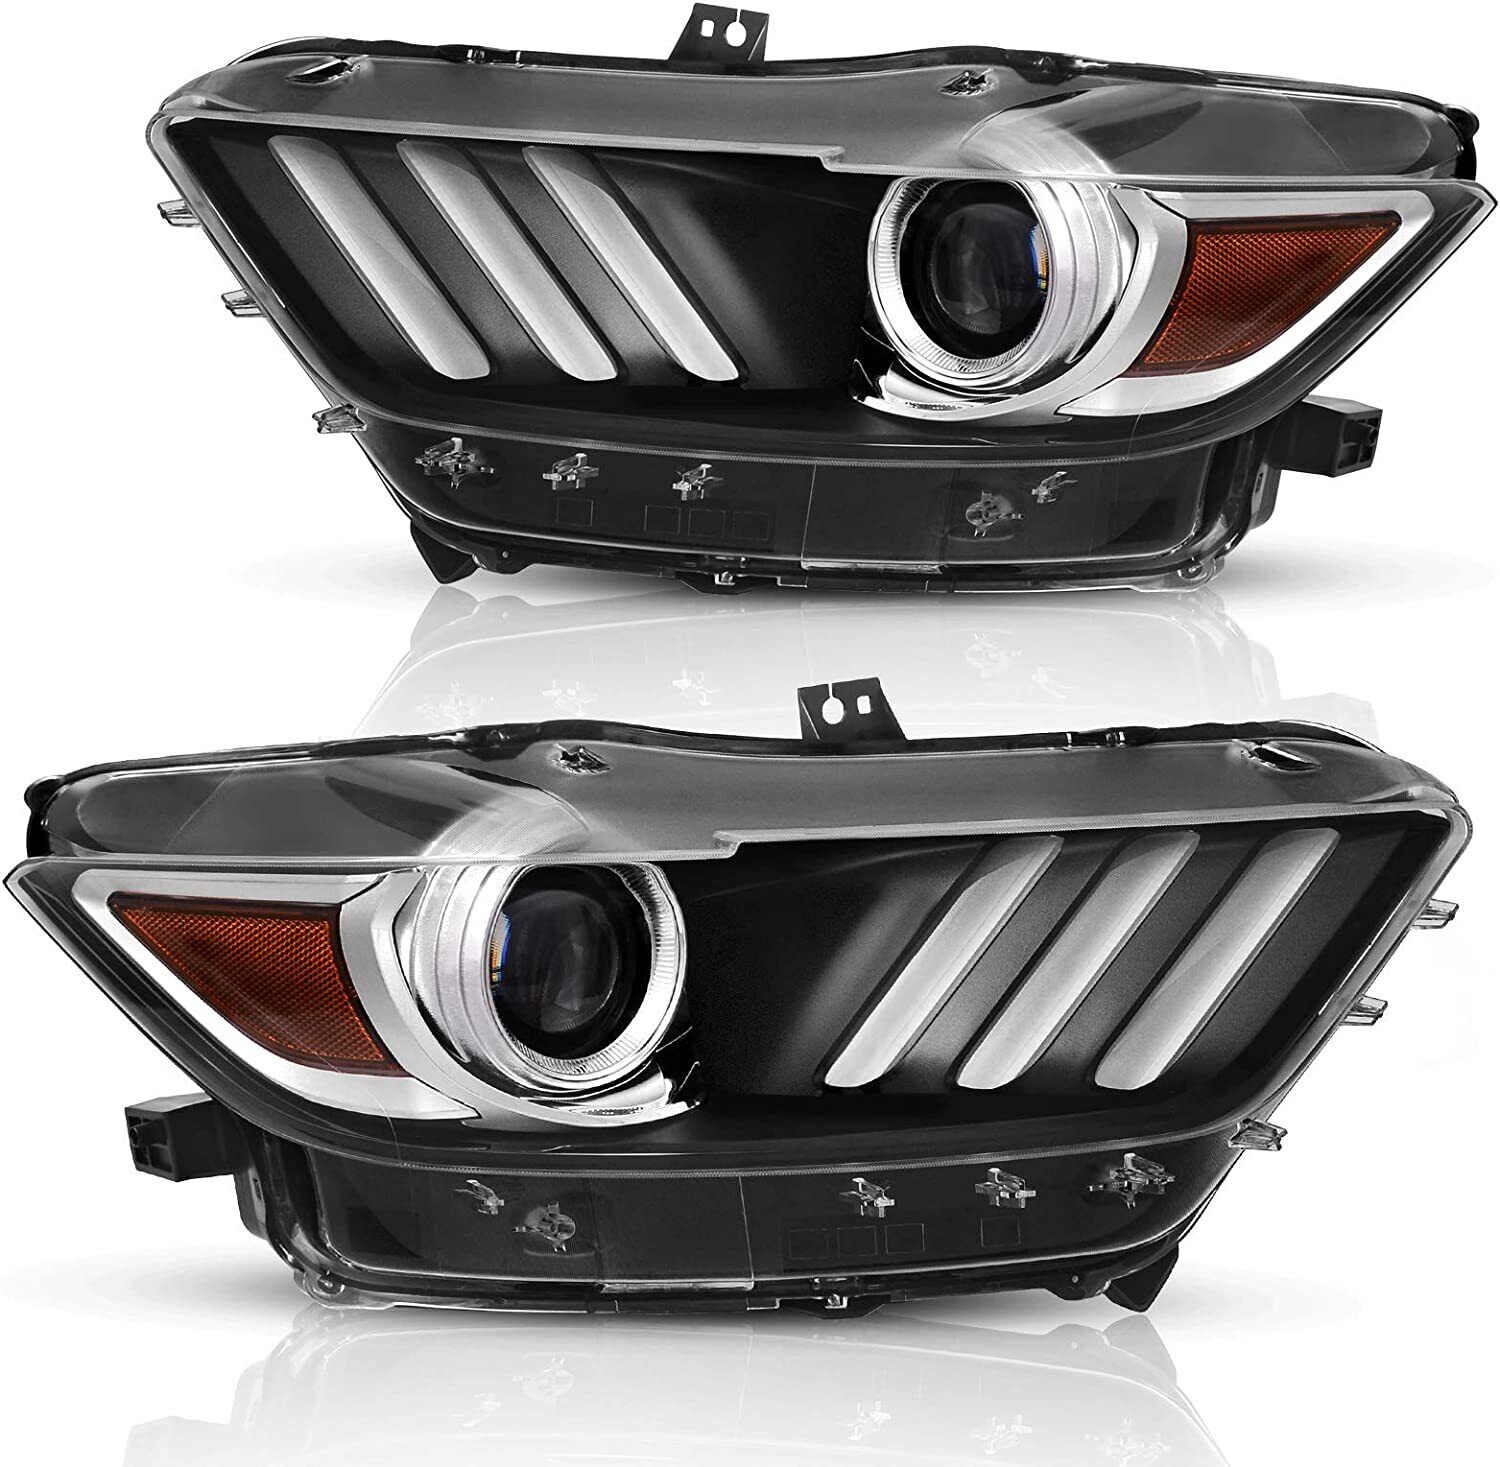 LED DRL HID/Xenon Headlights Set Left & Right for 2015 2016 2017 Ford Mustang 